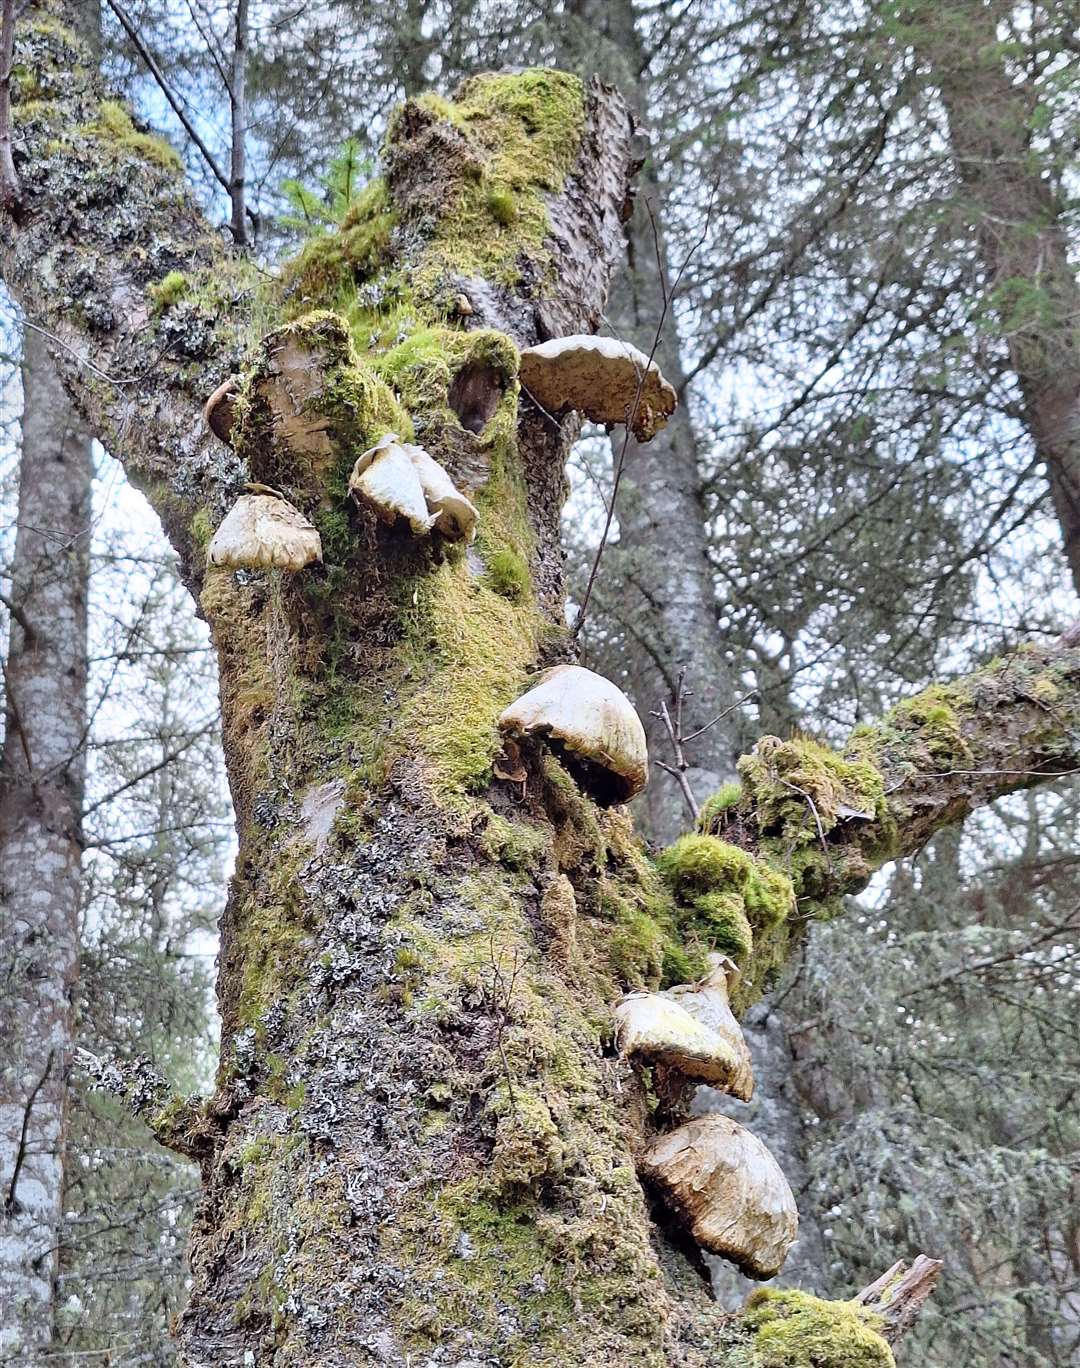 Elephant’s foot fungus on an old tree trunk.